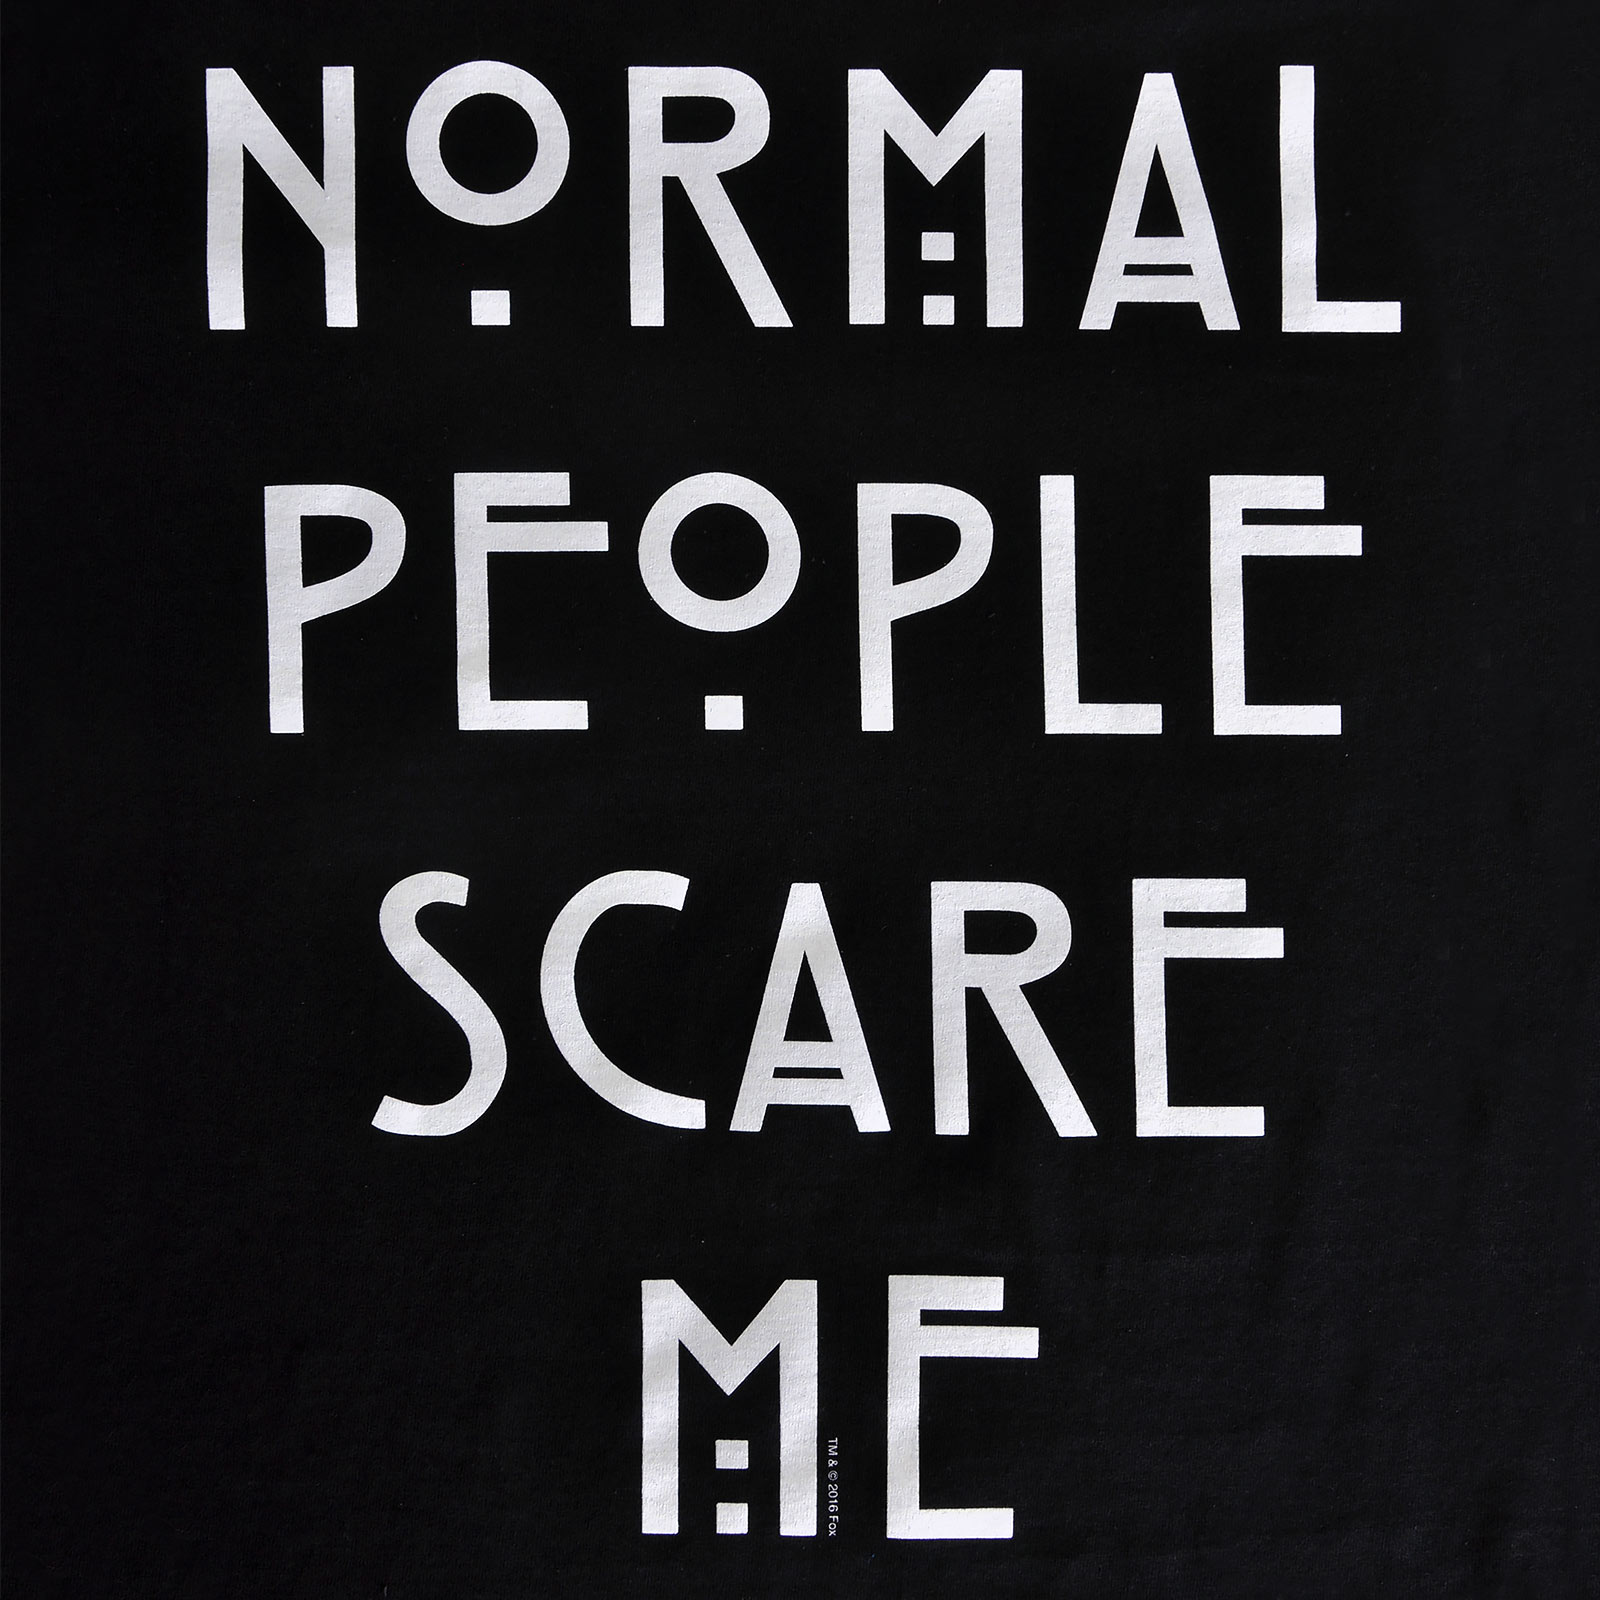 American Horror Story - Normal People Scare Me T-Shirt